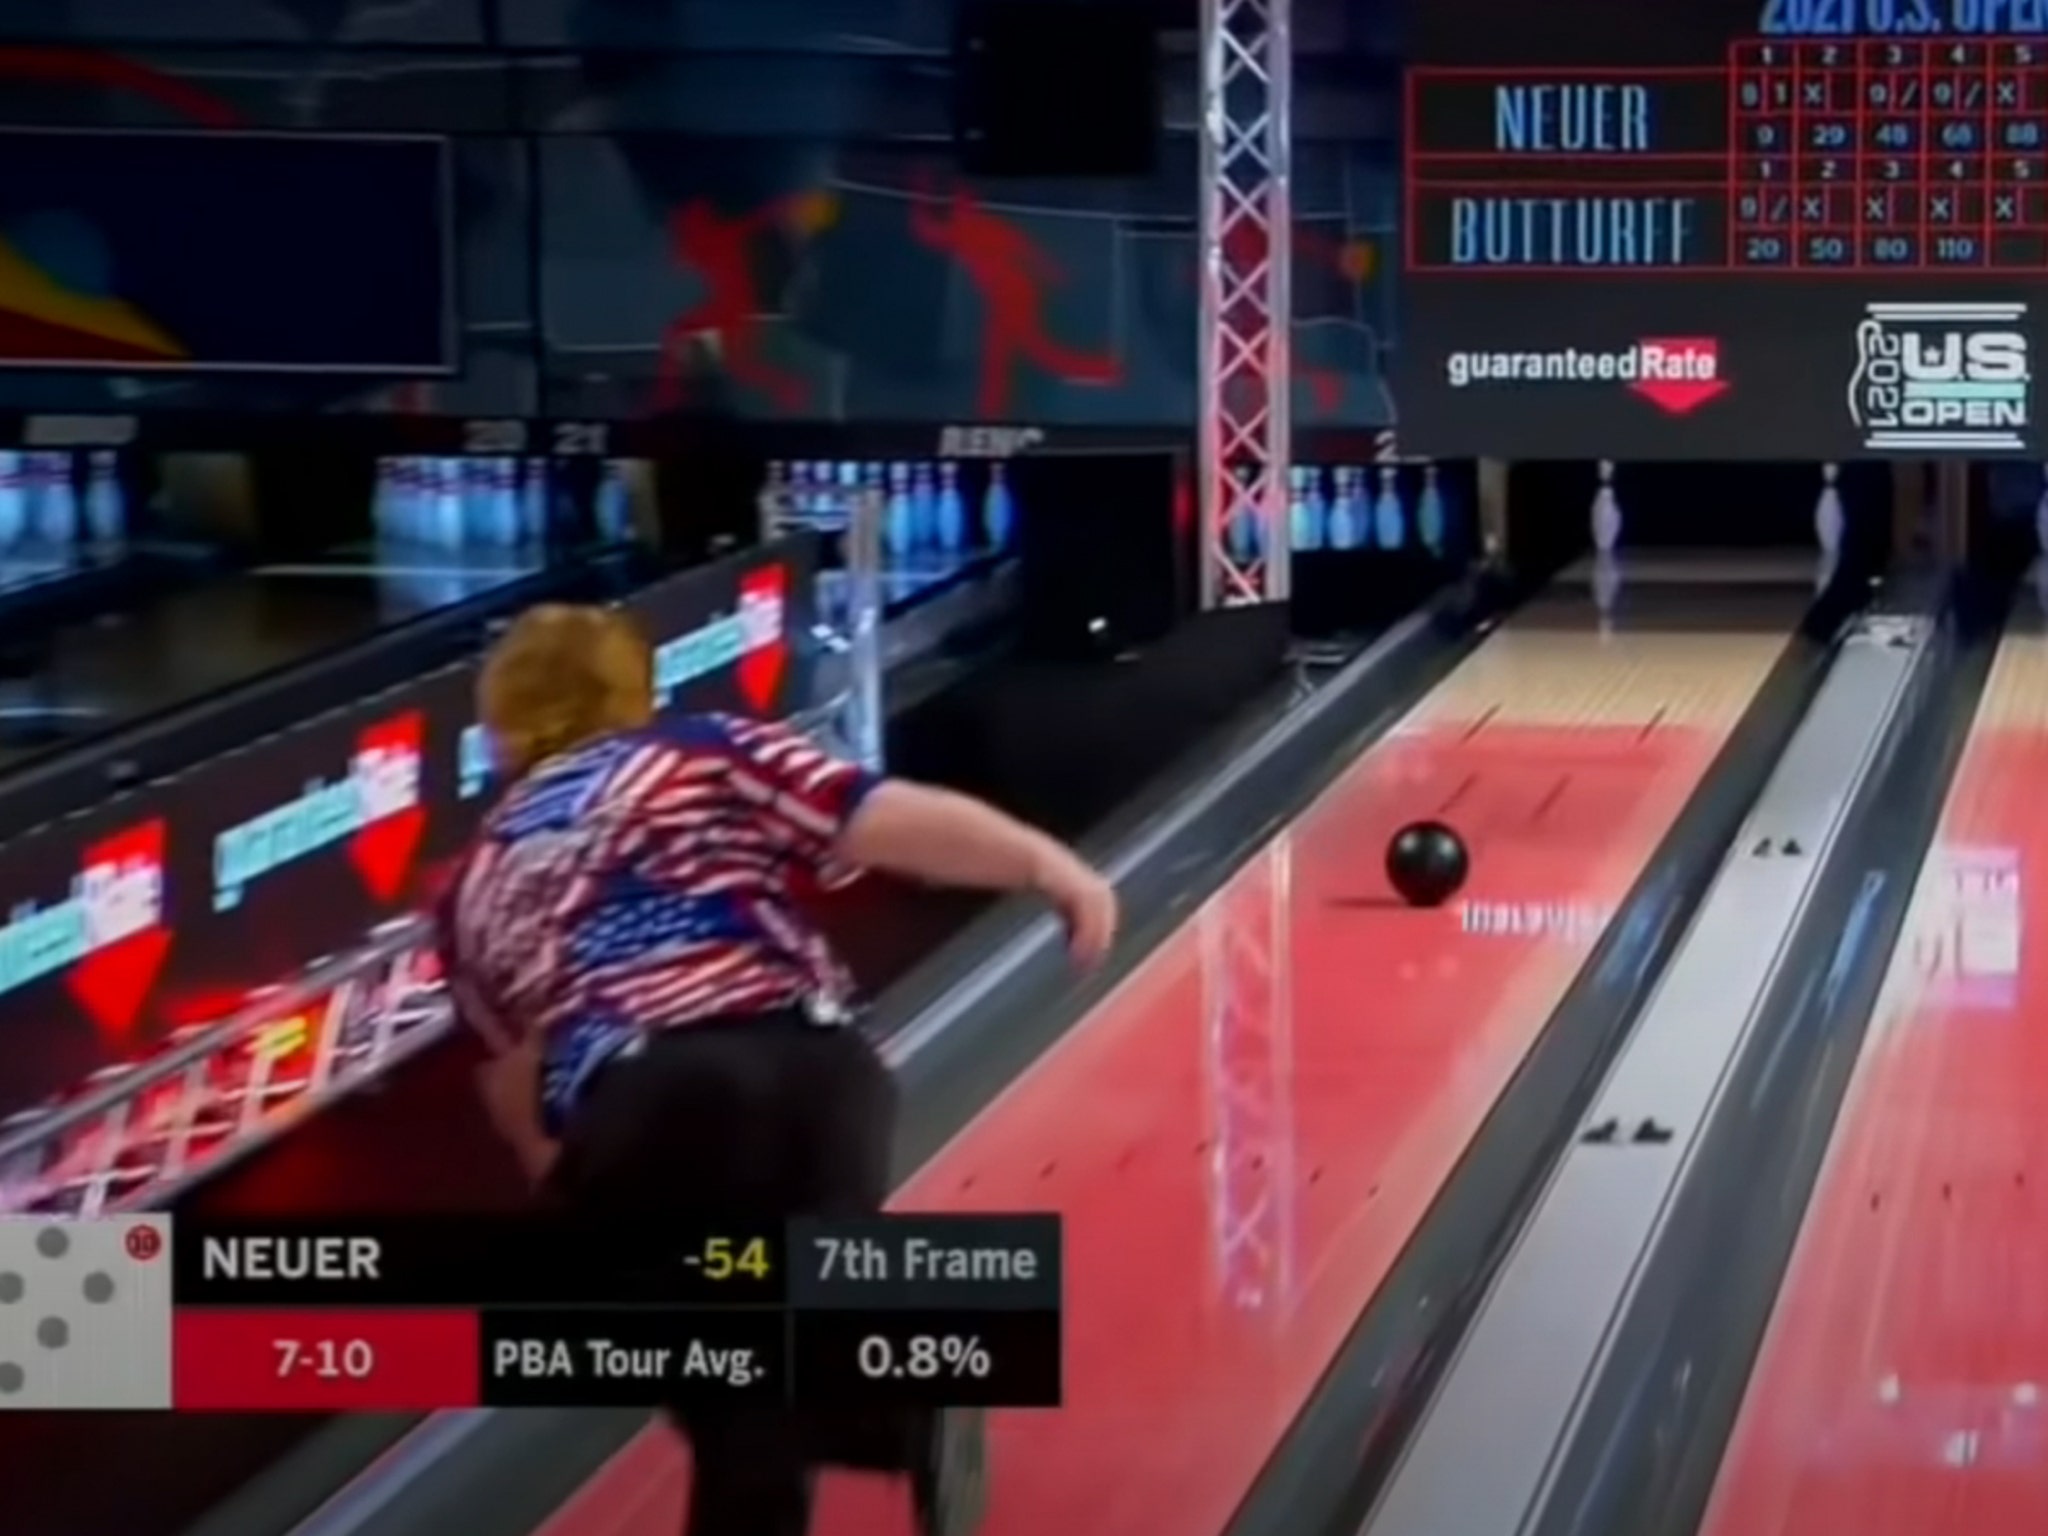 Pro Bowling Announcer Loses His Mind After 18-Year-Old Hits 7-10 Split, He Did It!